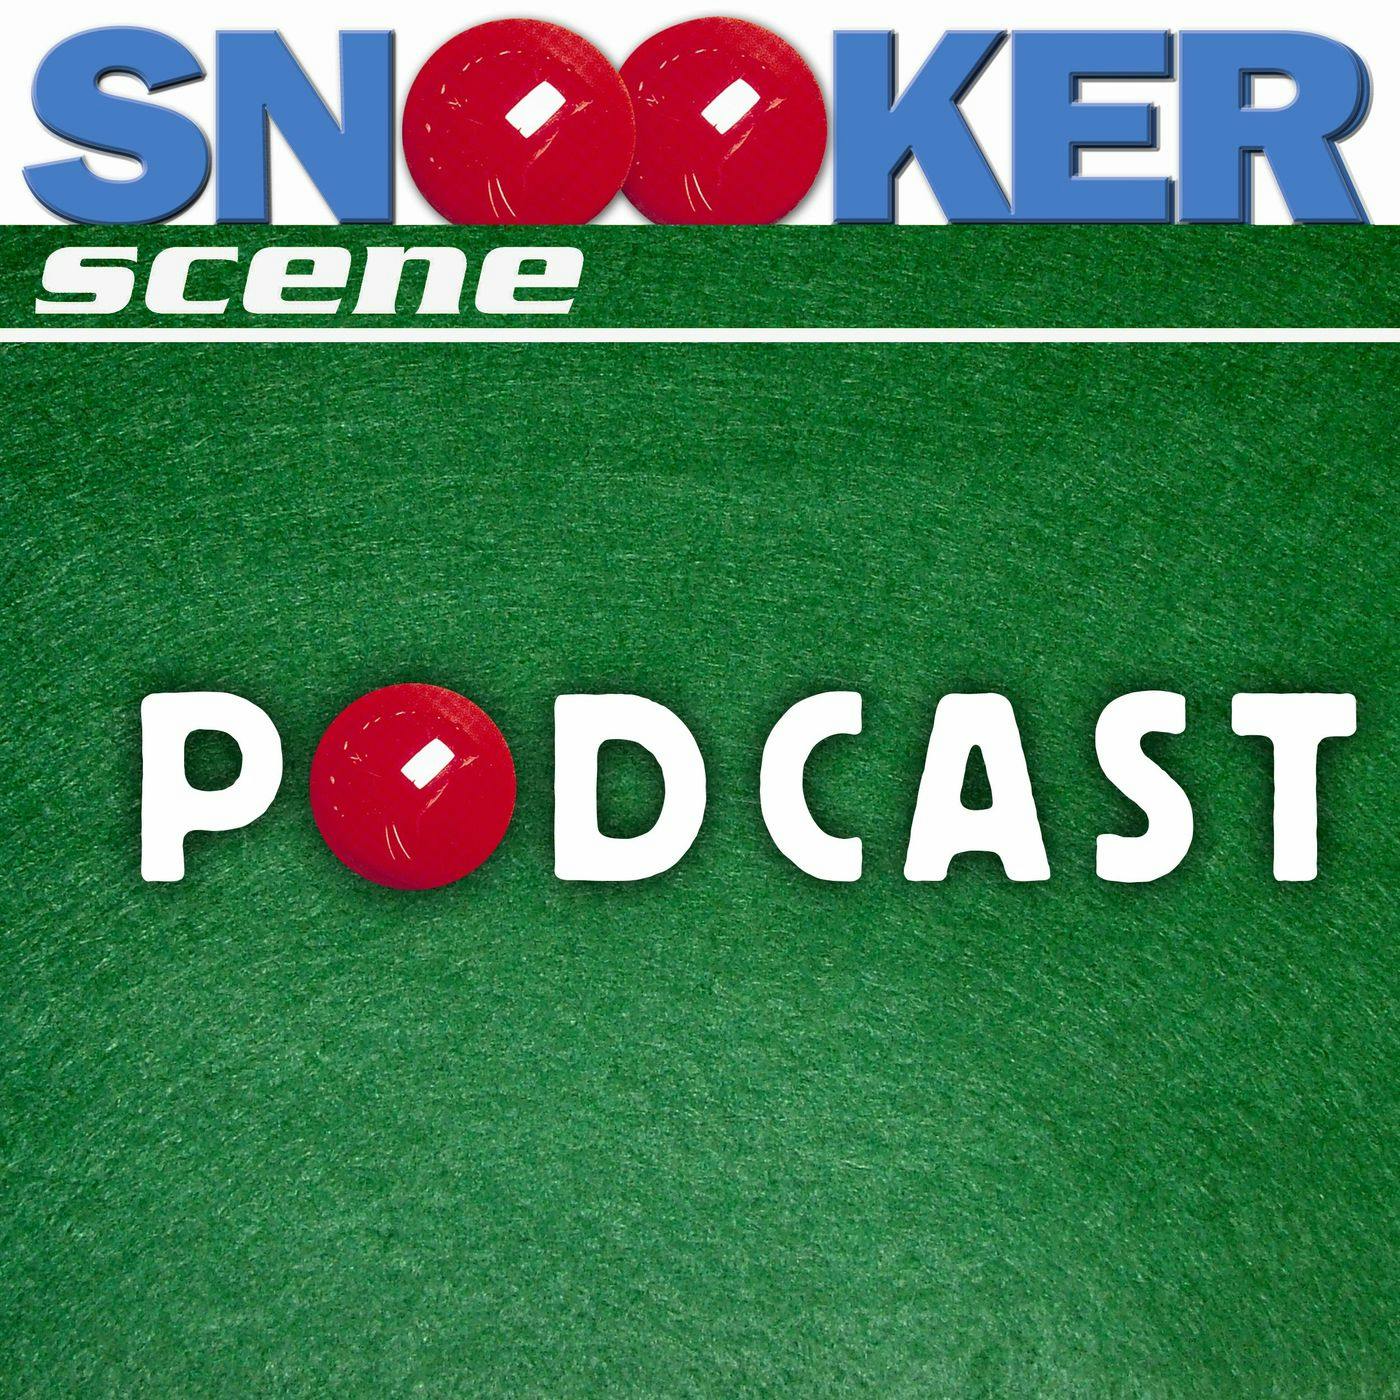 Snooker Scene Podcast episode 159 - A new ranking system?